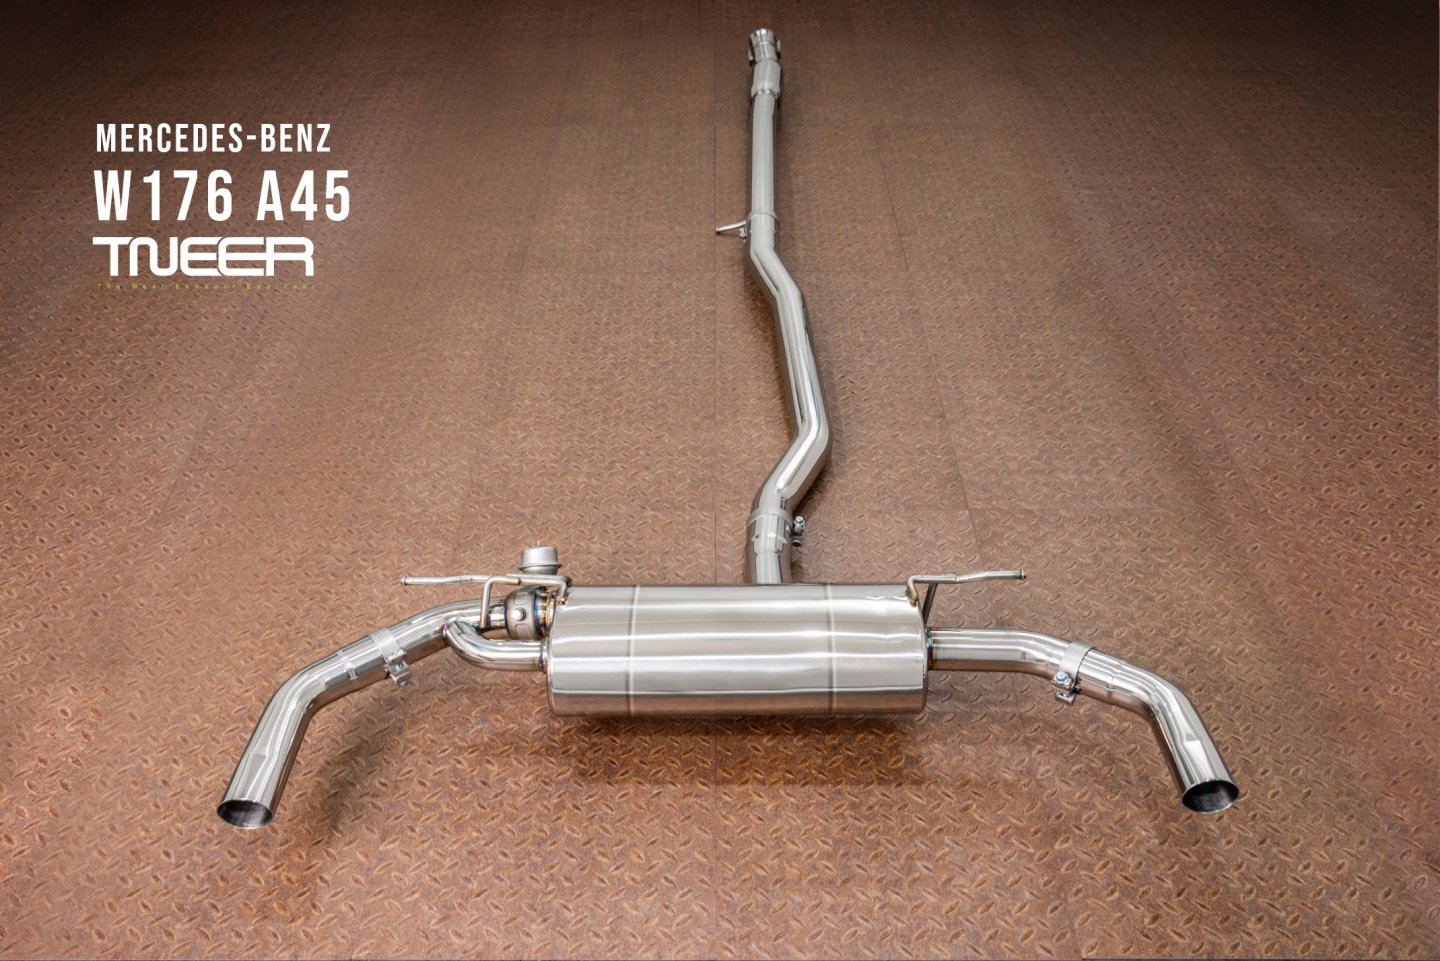 Milltek Audi S3 Cat-Back Exhaust System with Polished Trims